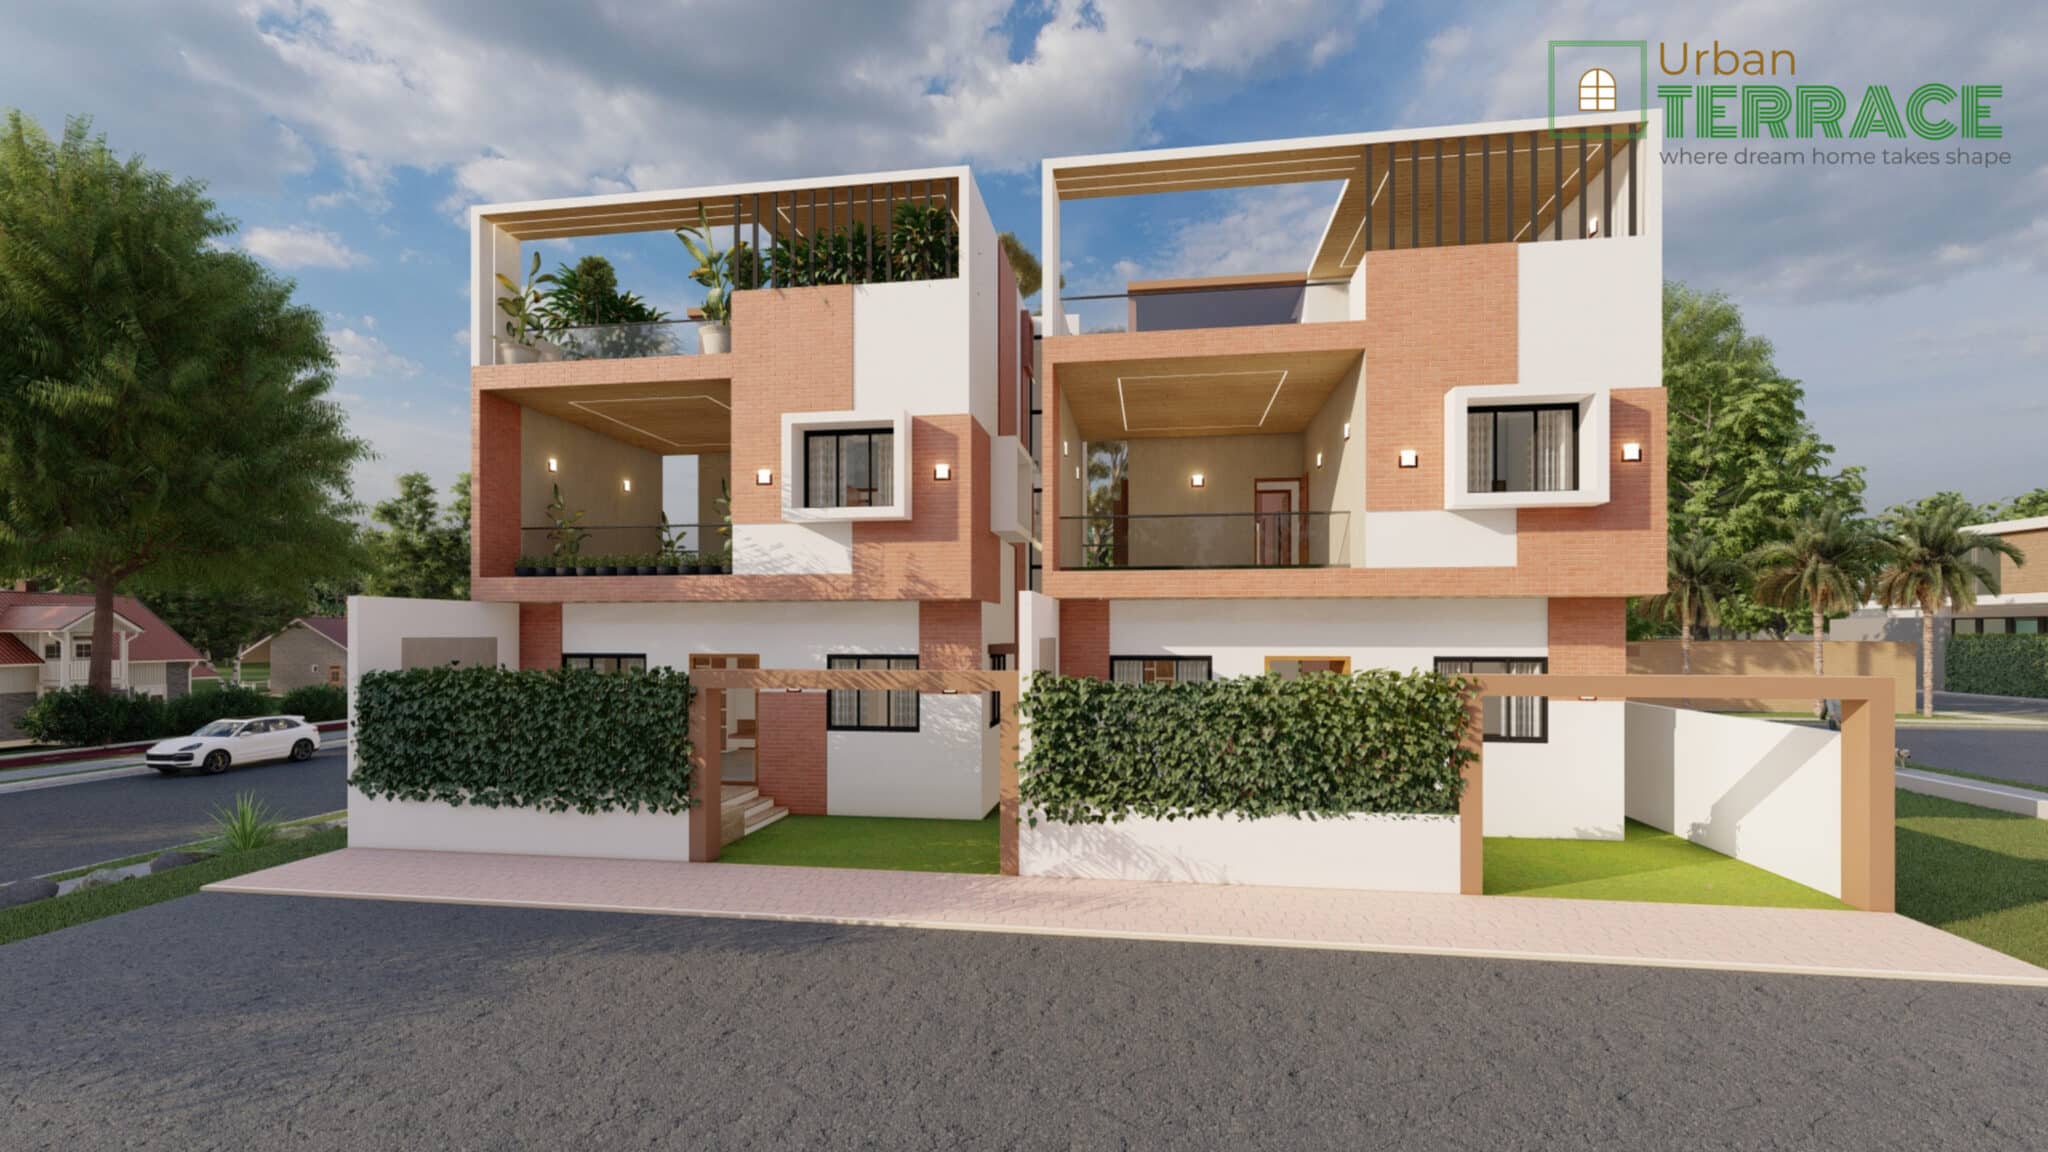 new bungalow home design 30x50 west facing urban terrace indore front elevation